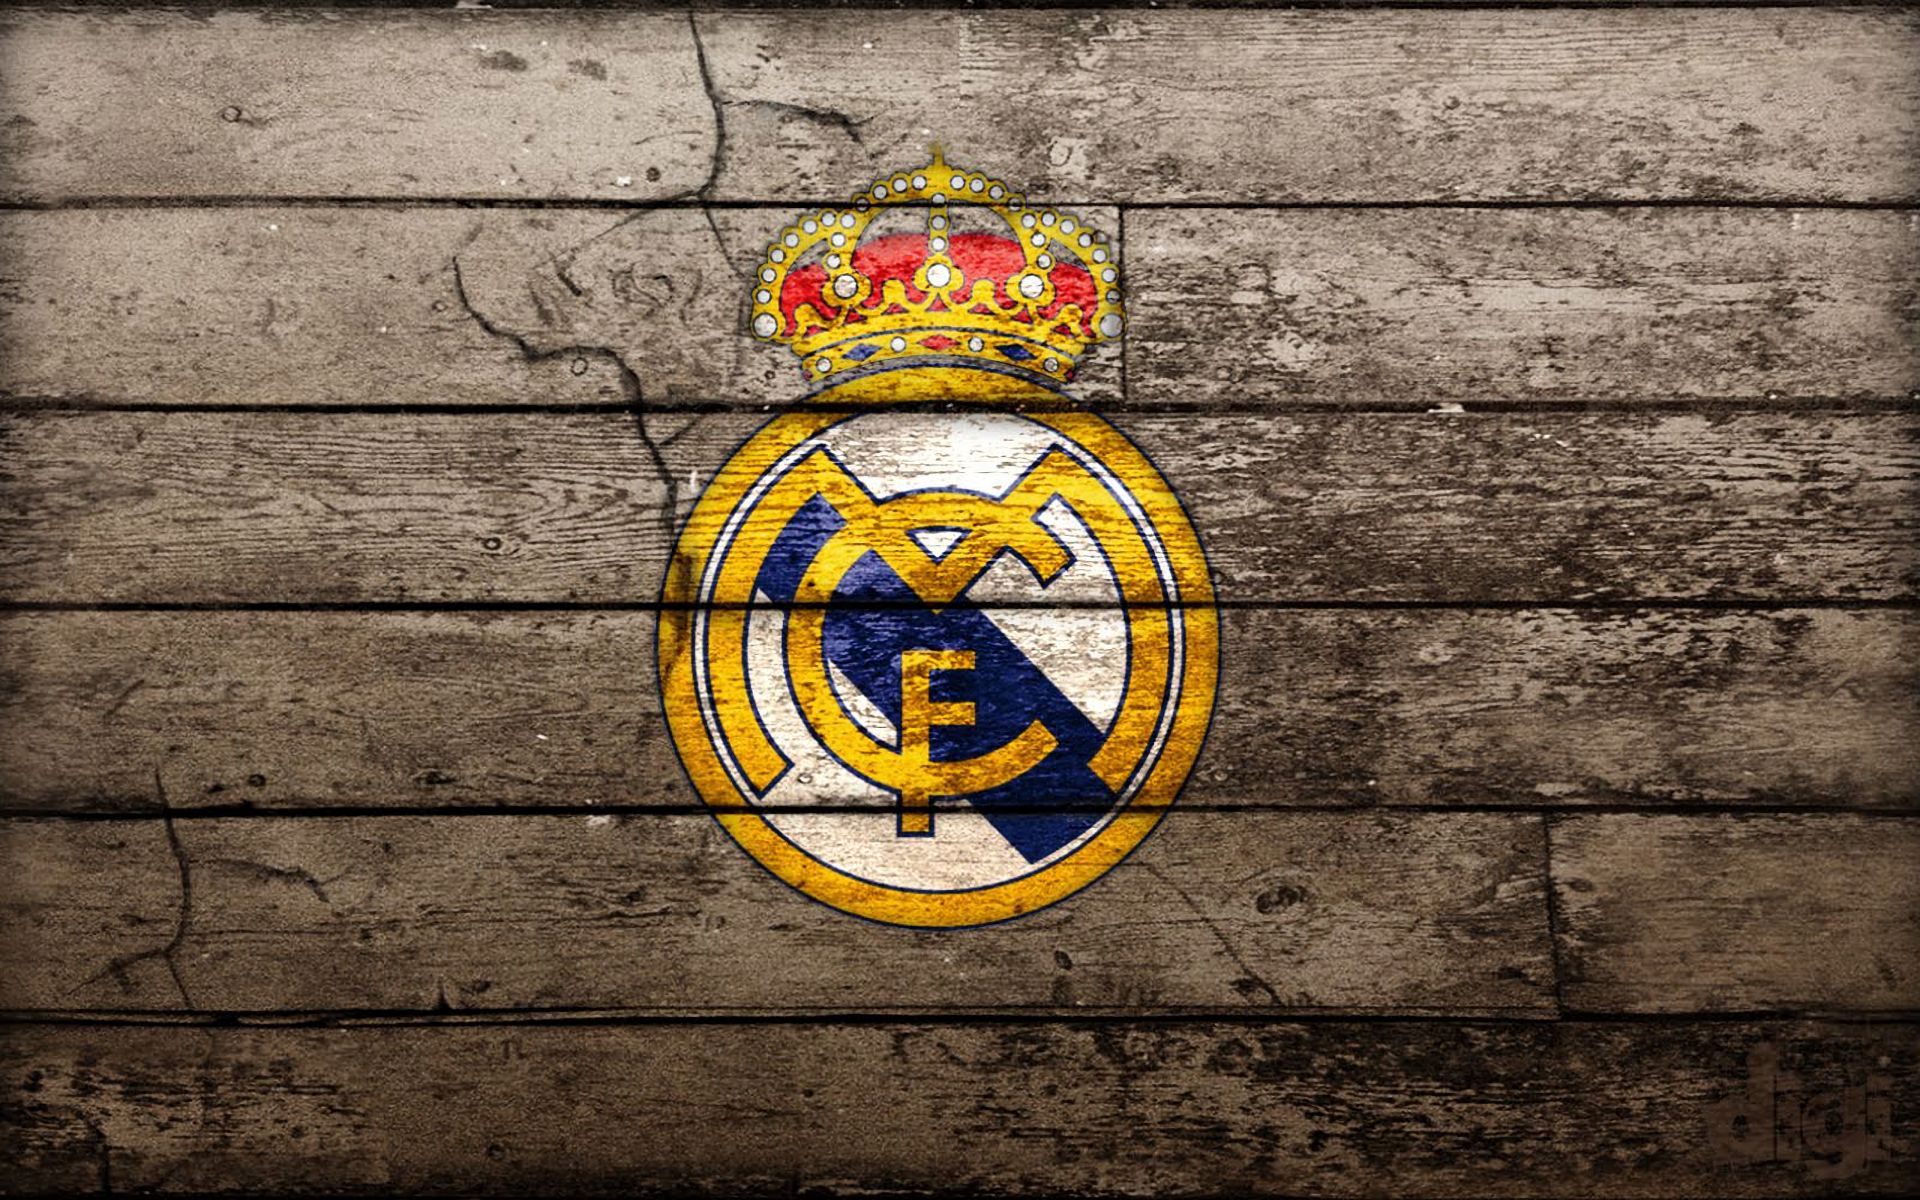 Sports Real Madrid C.F. HD Wallpaper | Background Image